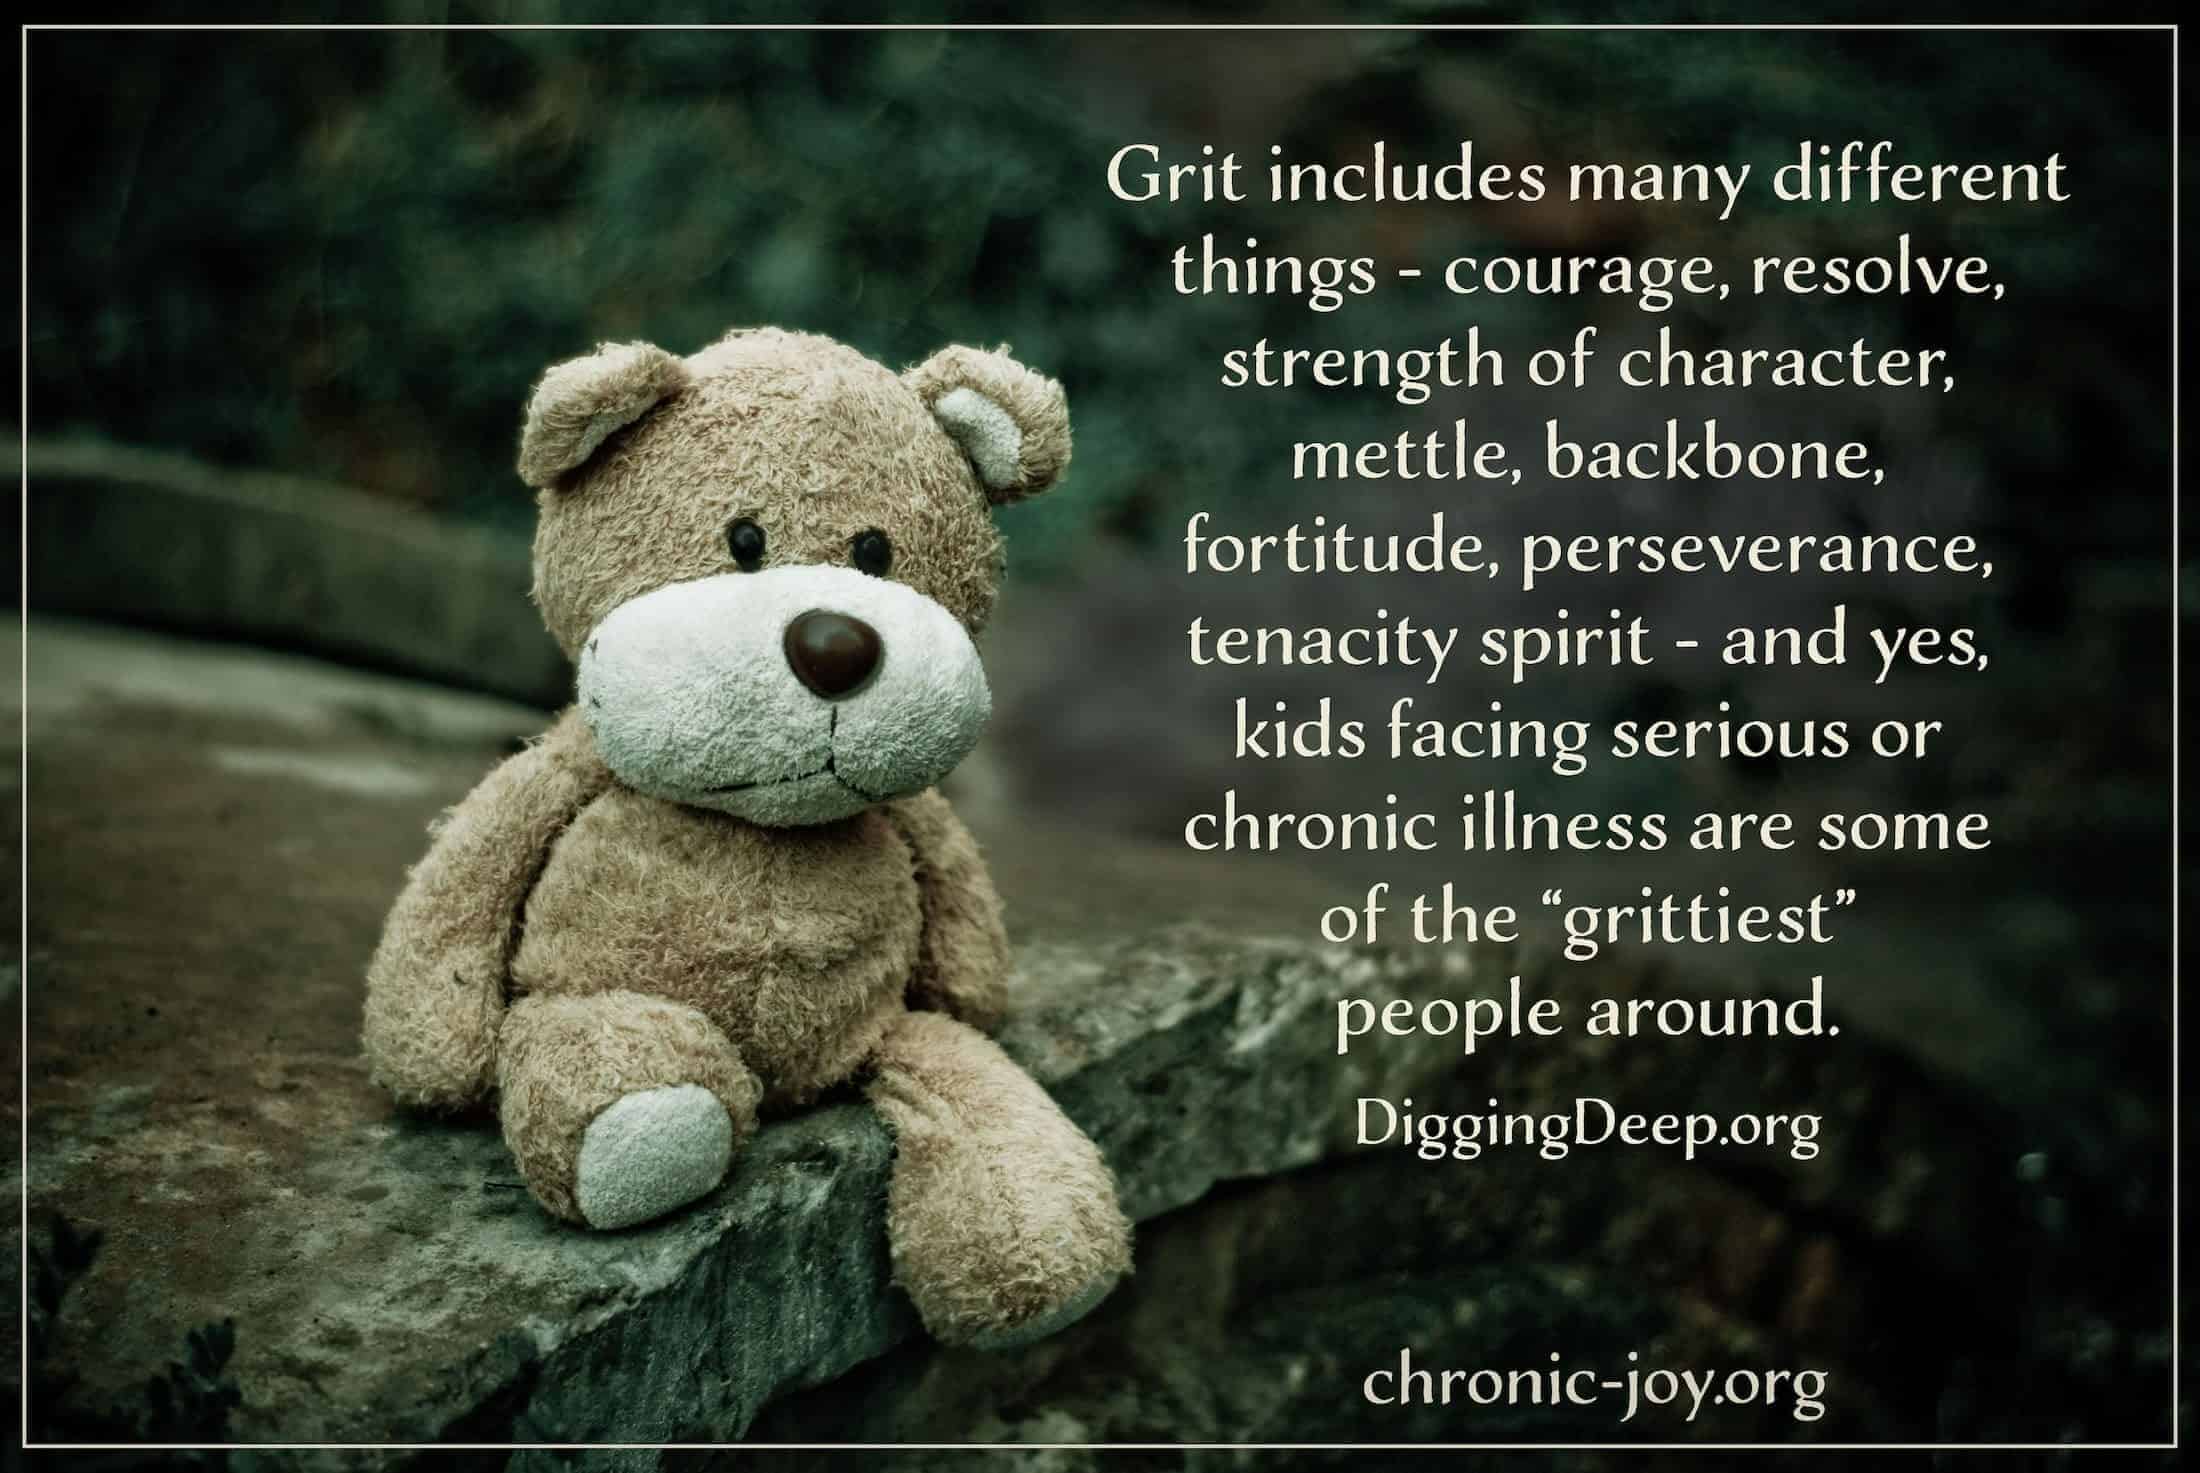 “In order to cultivate gratitude in kids who are sick, the focus must be on allowing them to tell their own #story, creating a safe space for them to share, and creating opportunities to highlight the blessings and strengths around them.” DiggingDeep.org